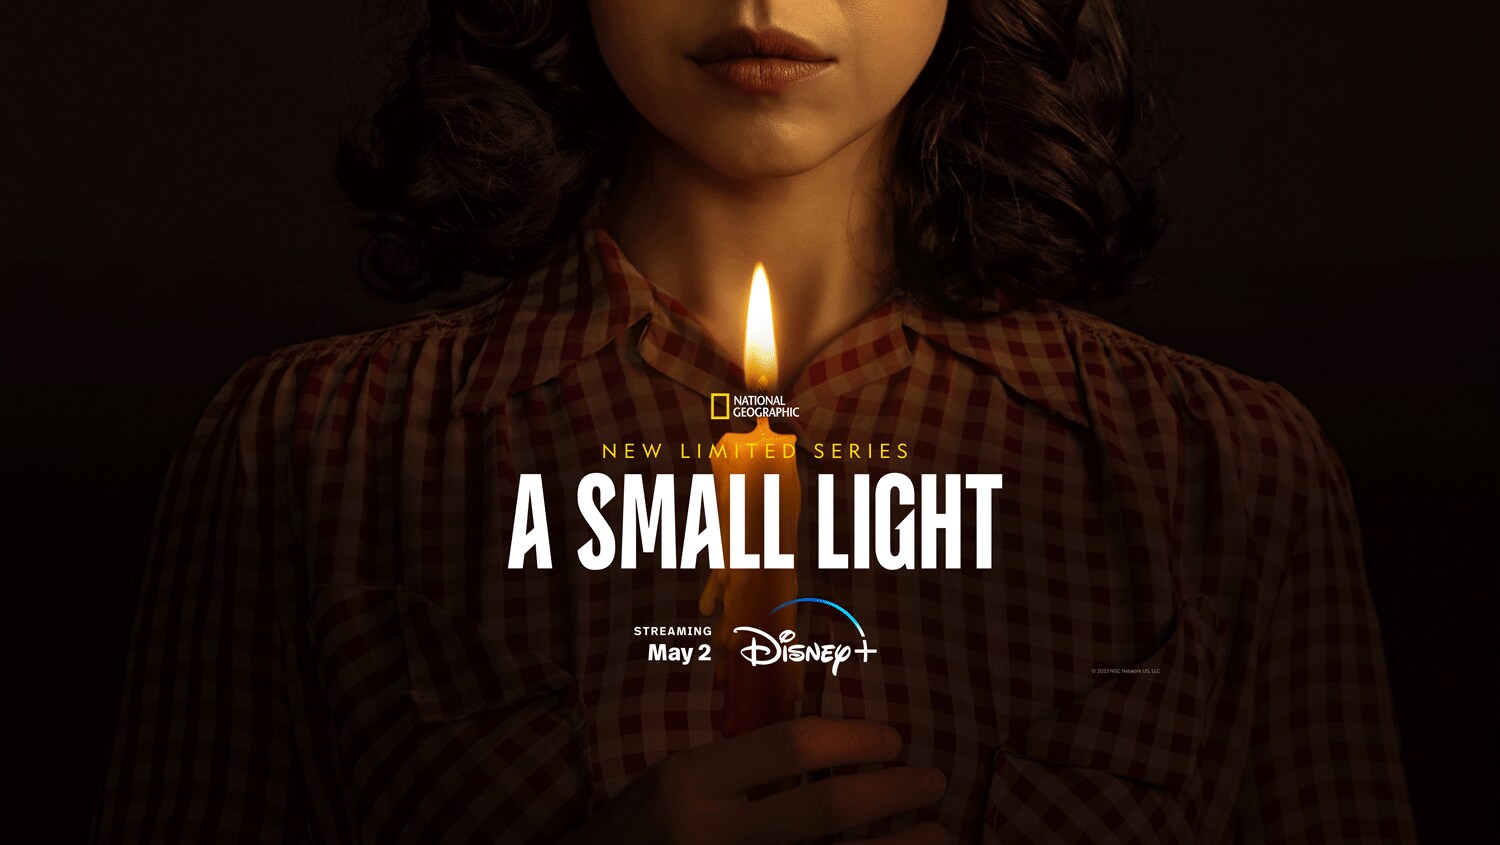 DISNEY+ ANNOUNCES PREMIERE DATE FOR LIMITED SERIES A SMALL LIGHT